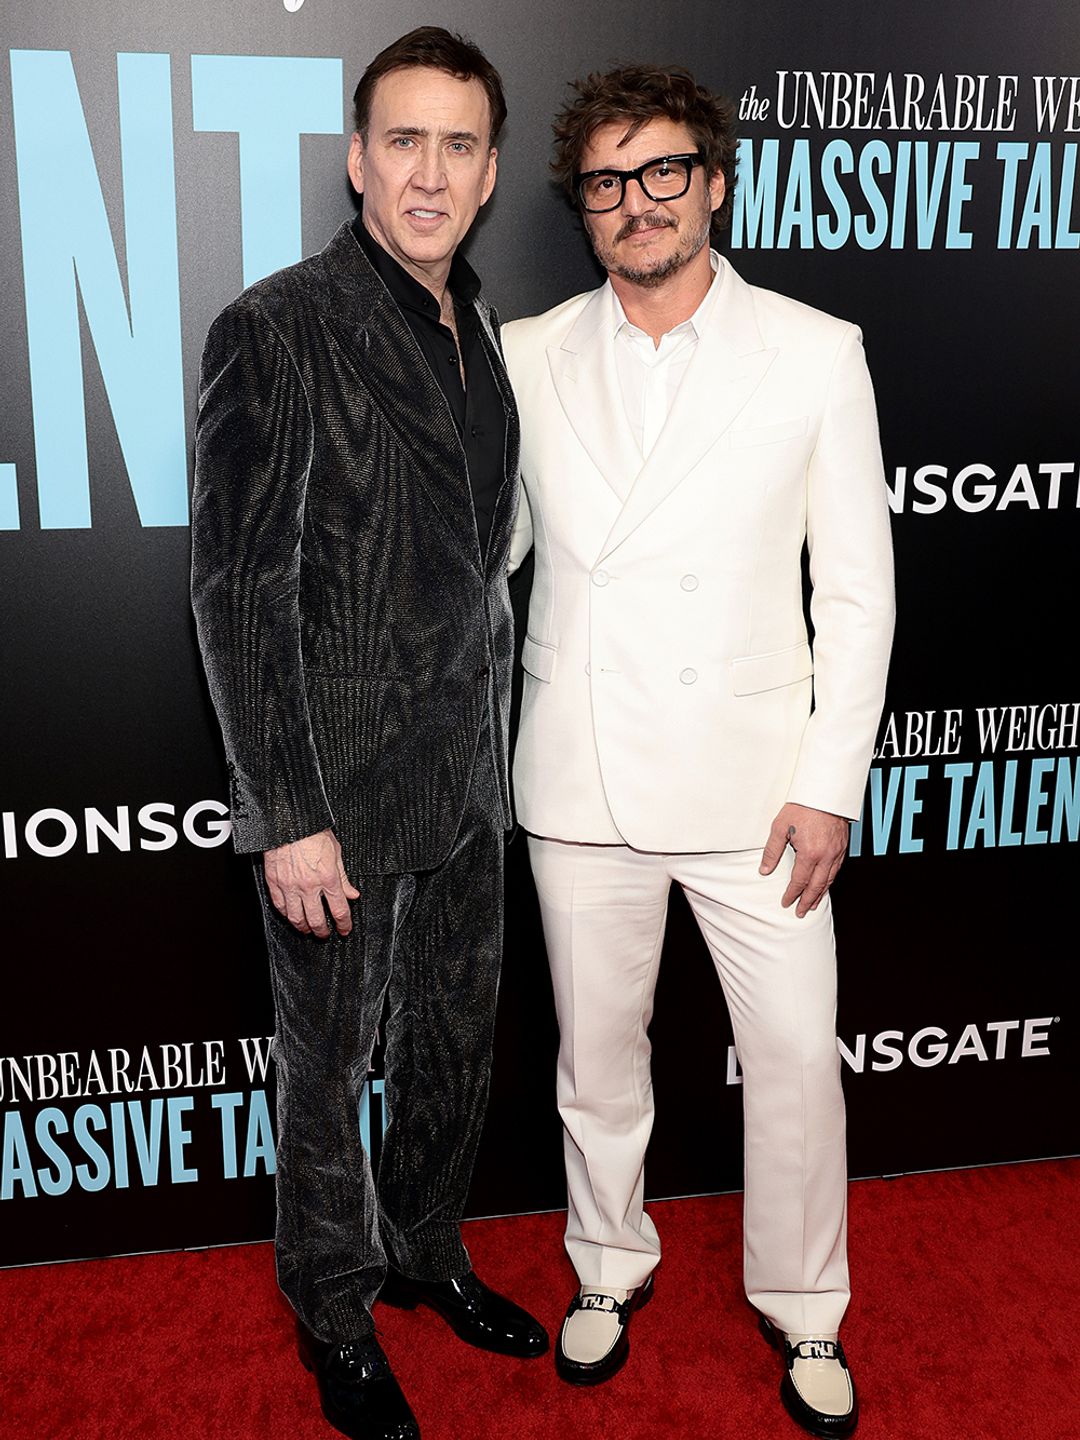 Nicolas Cage and his co-stat Pedro Pascal at the premiere of The Unbearable Weight Of Massive Talent